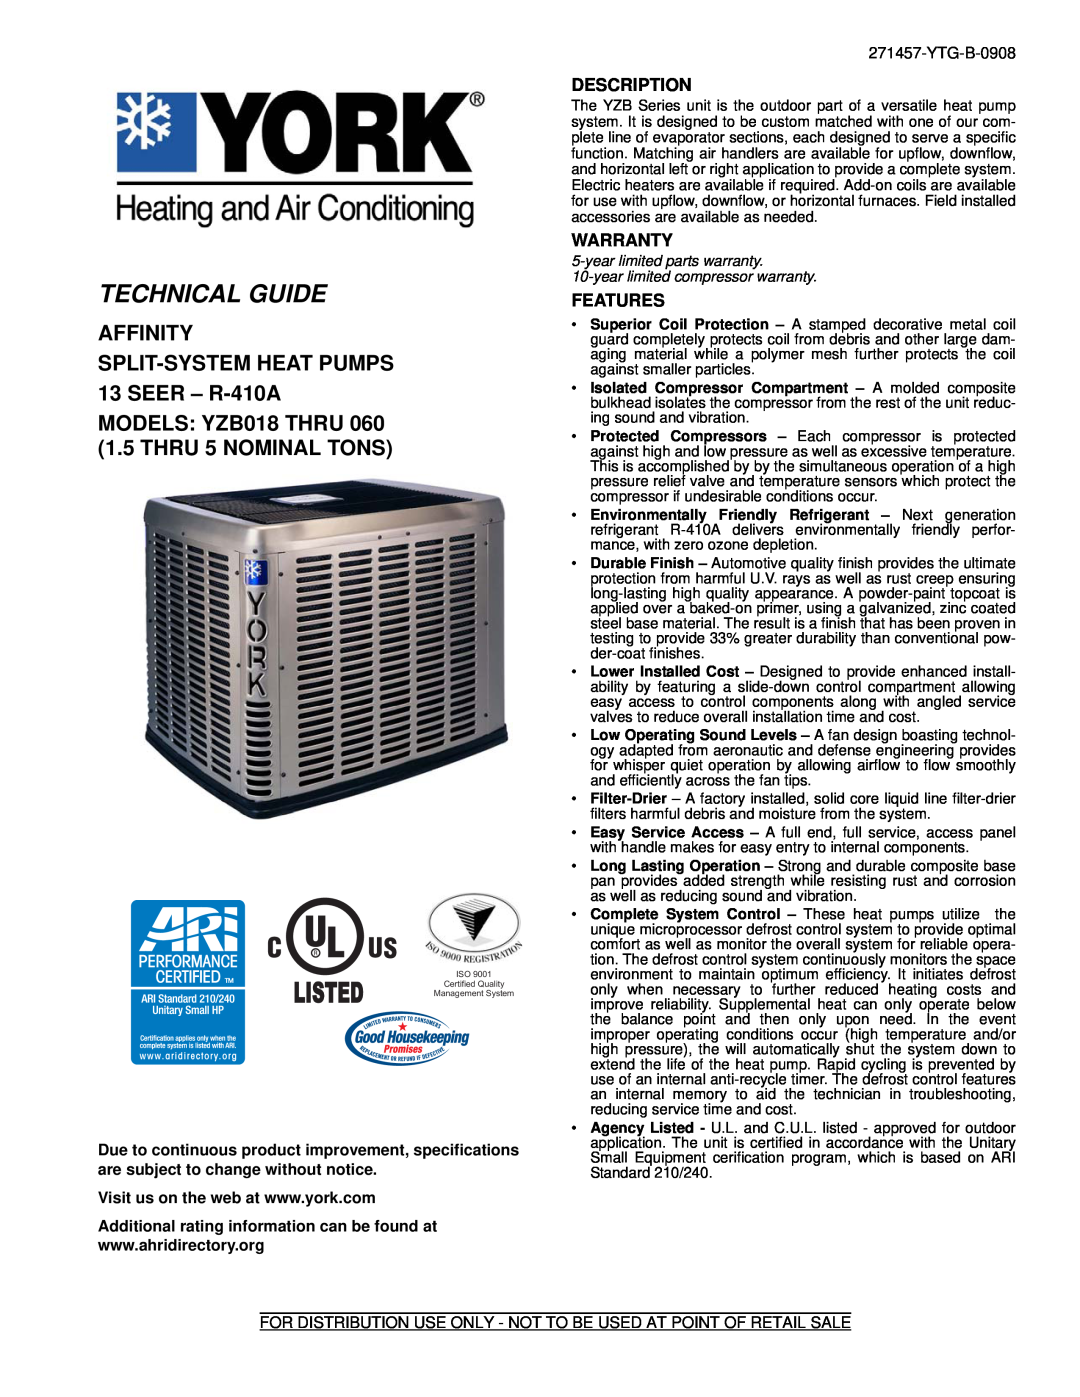 York YZB018 THRU 060 warranty Listed, Technical Guide, AFFINITY SPLIT-SYSTEMHEAT PUMPS 13 SEER - R-410A 